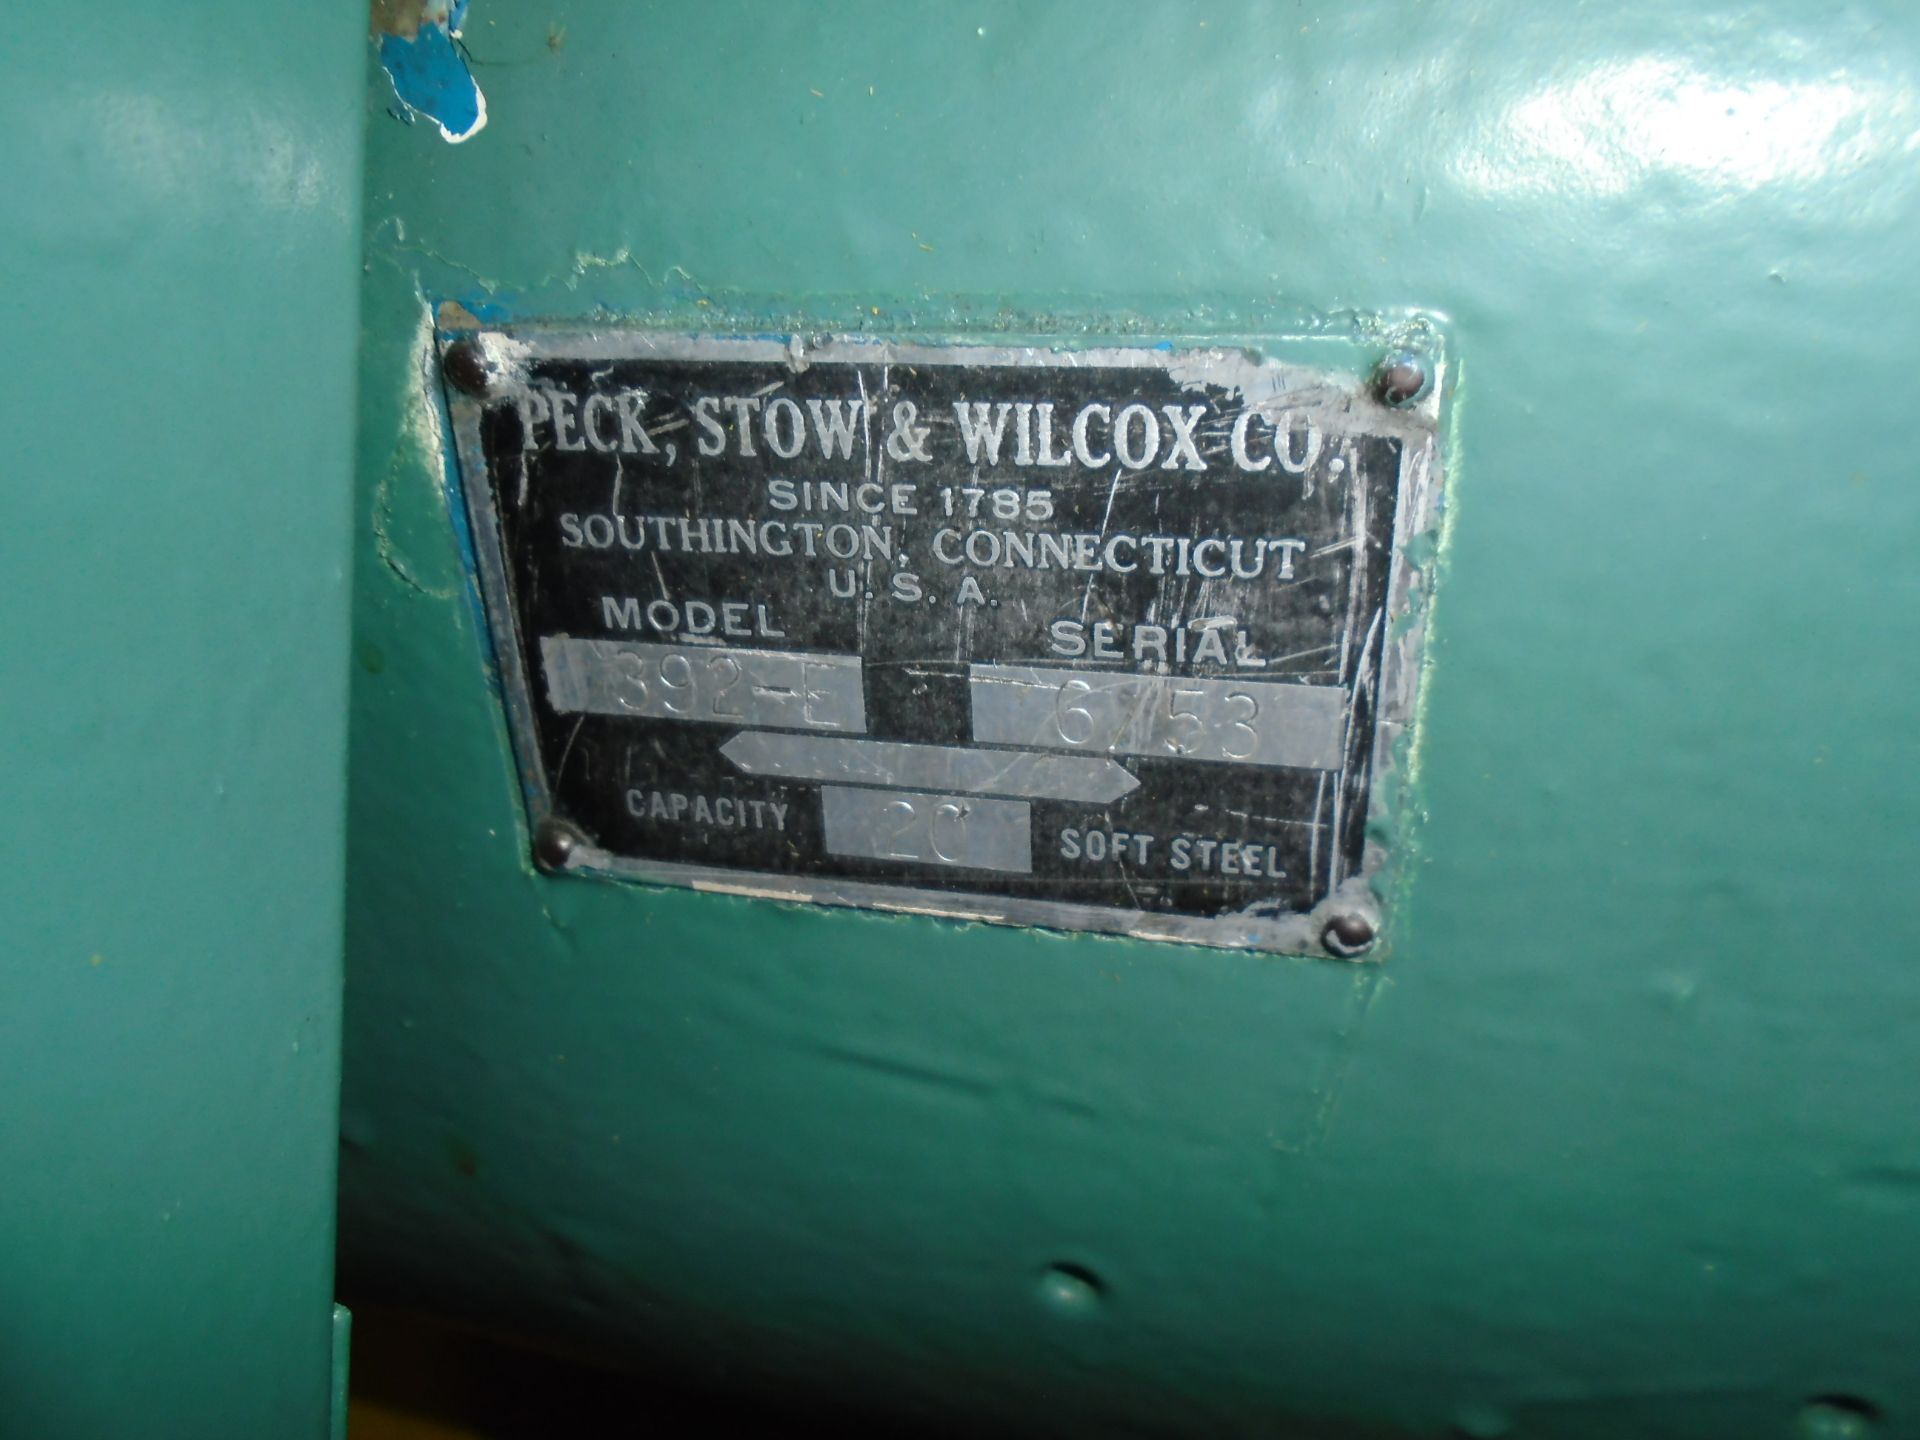 Peck Stow & Wilcox Co Power Roll Forming Machine 20 Gage Capacity 3” x 36” Model 392-E SN: 6/53 - Image 10 of 10